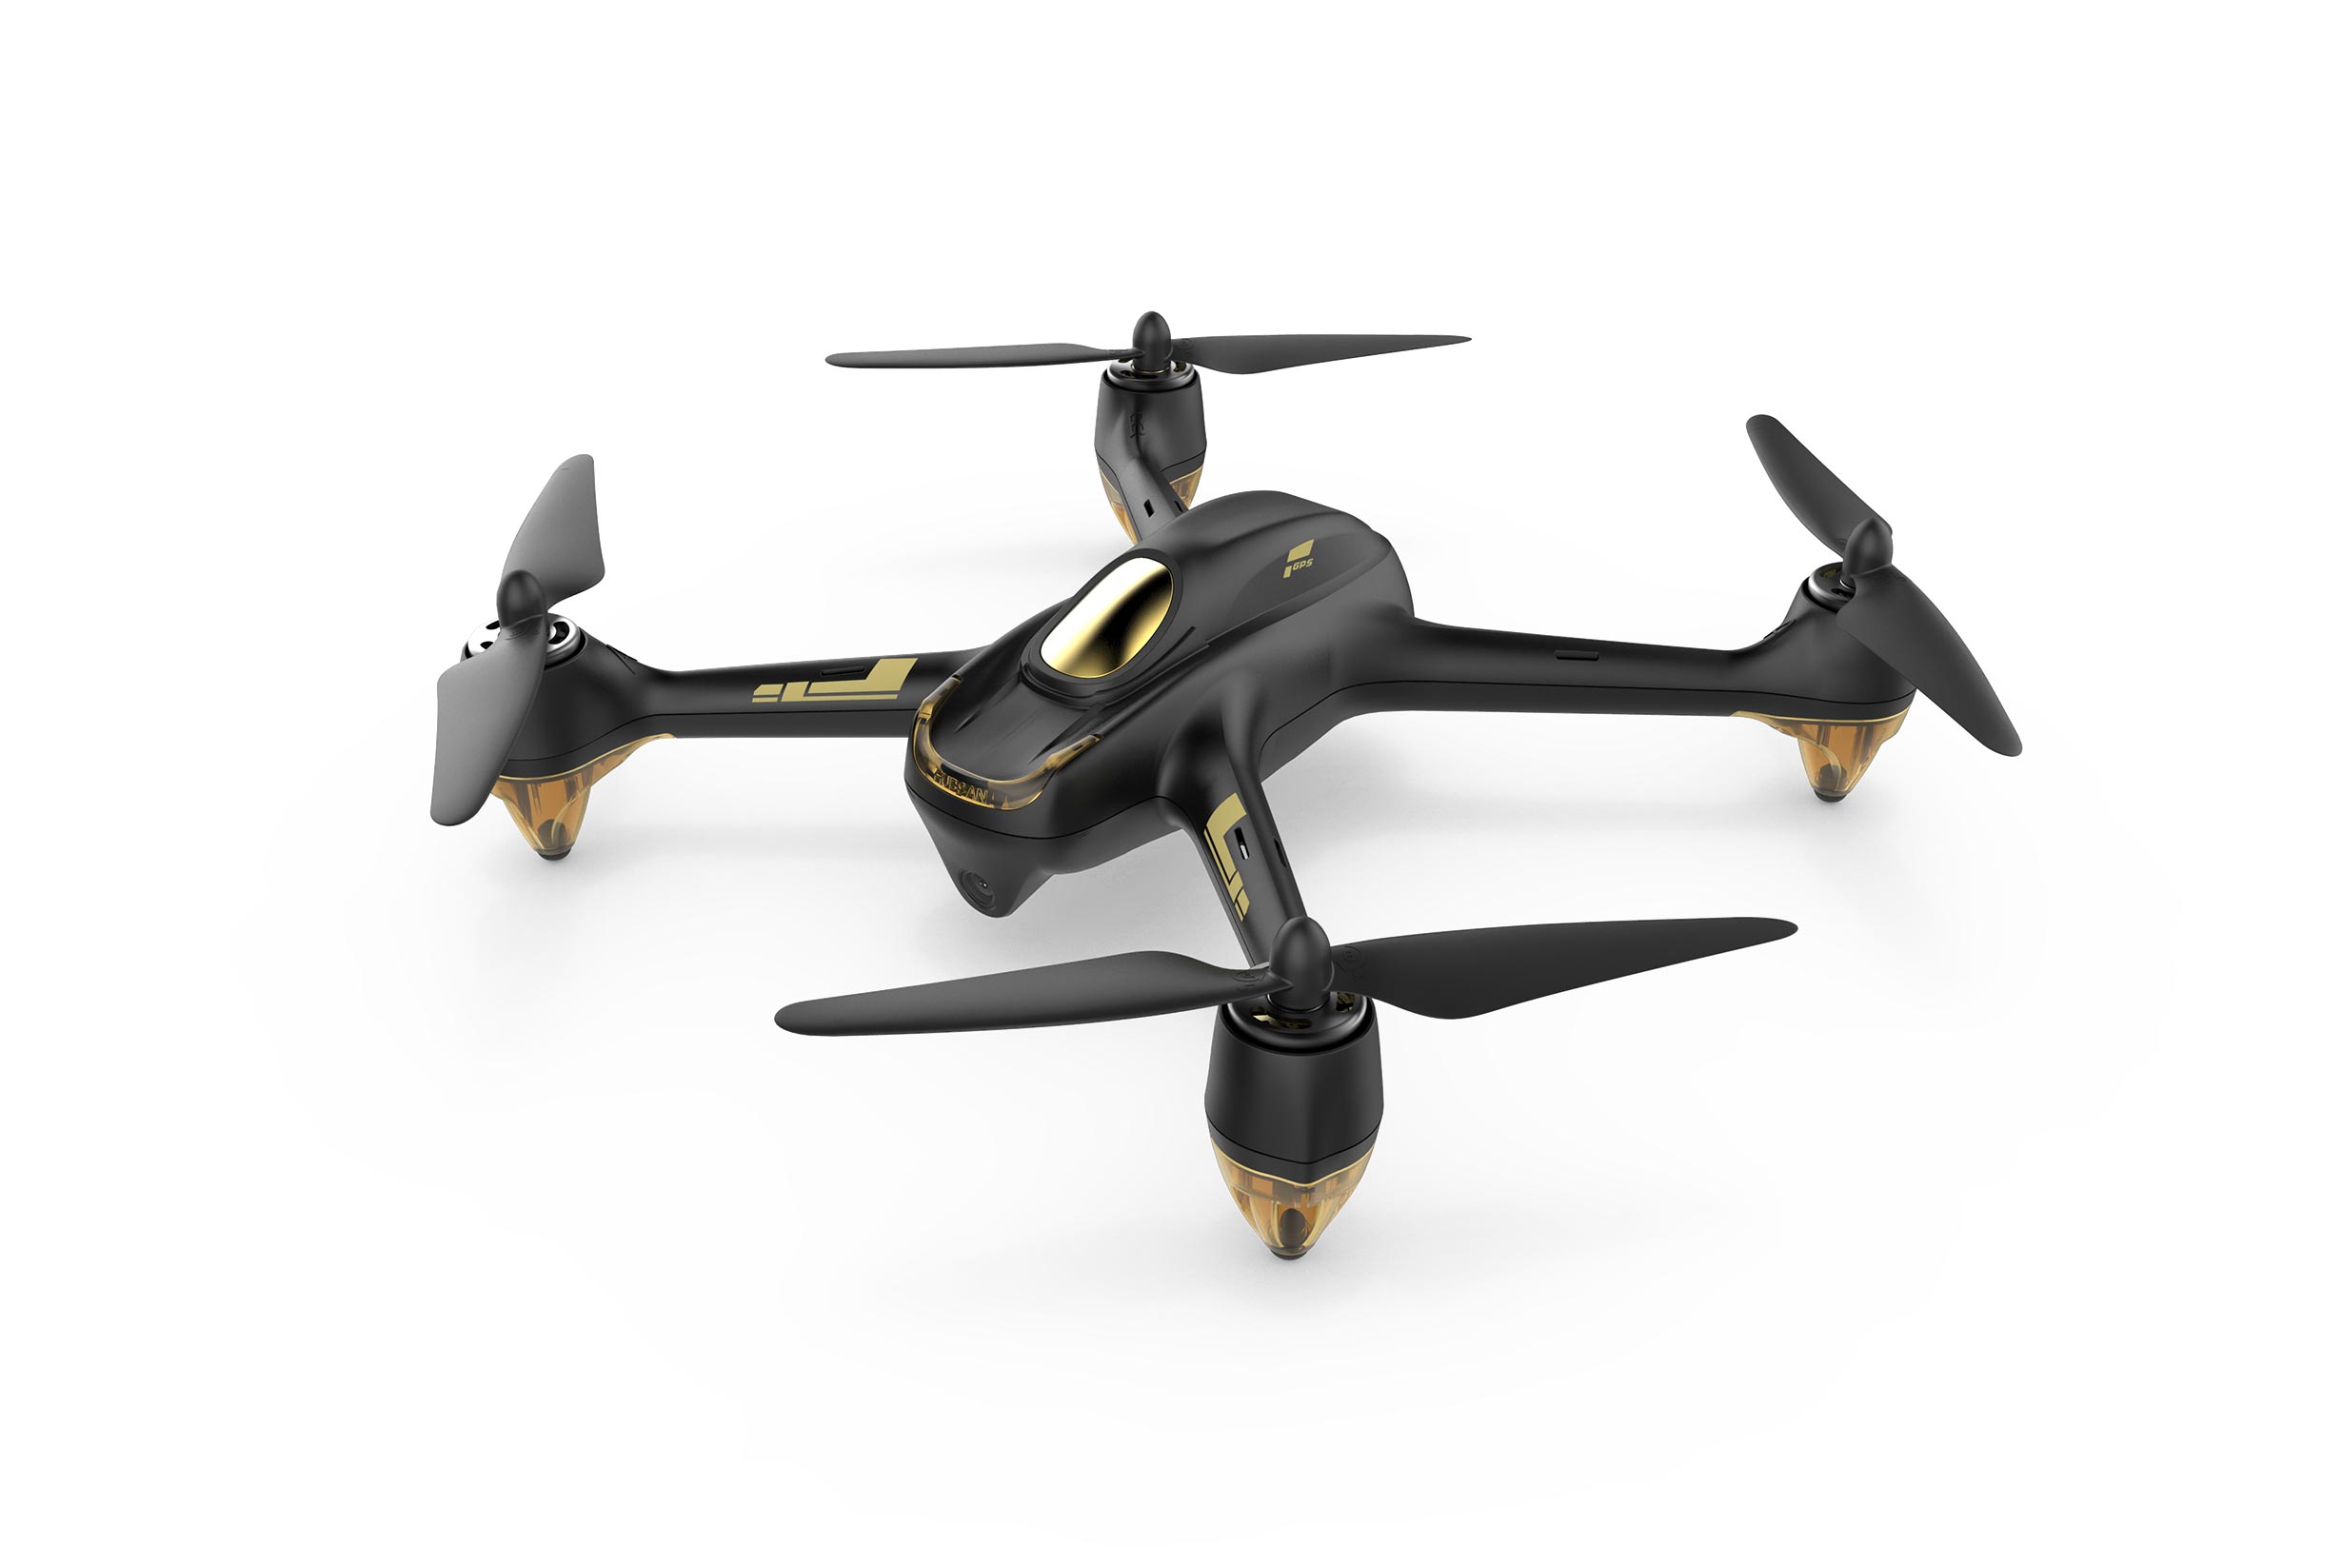 Hubsan H501S and H507S